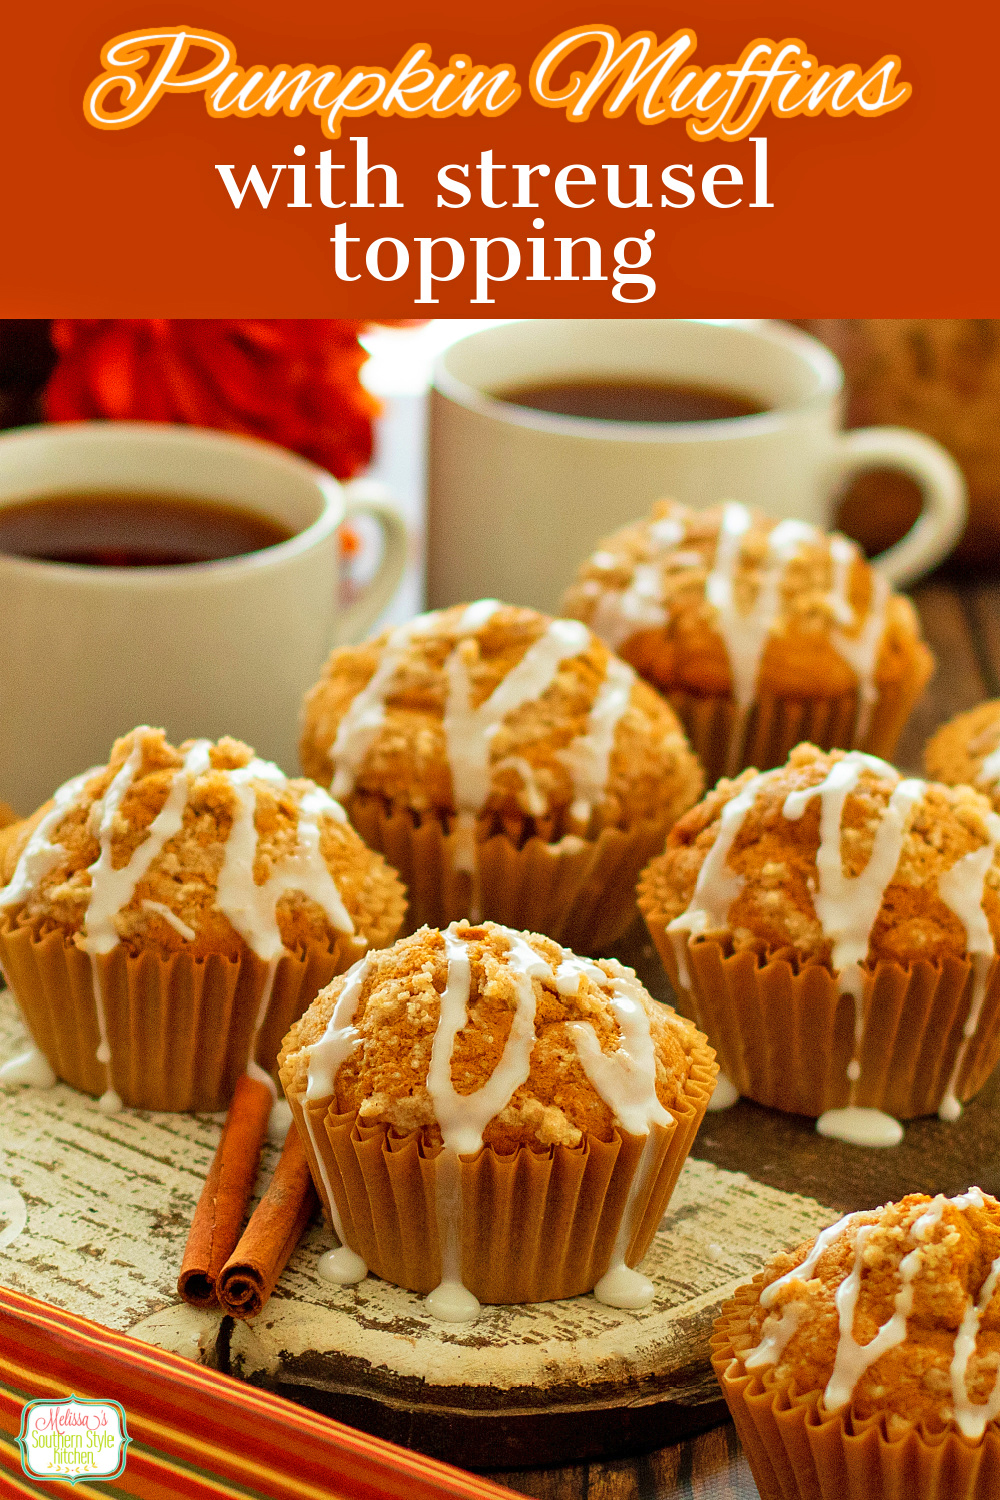 Enjoy these Pumpkin Muffins with Streusel Topping with a cup of Joe or hot tea #pumpkinmuffins #pumpkinrecipes #pumpkindesserts #easymuffins #muffinrecipes #easypumpkinrecipes #streuselmuffins #pumpkin